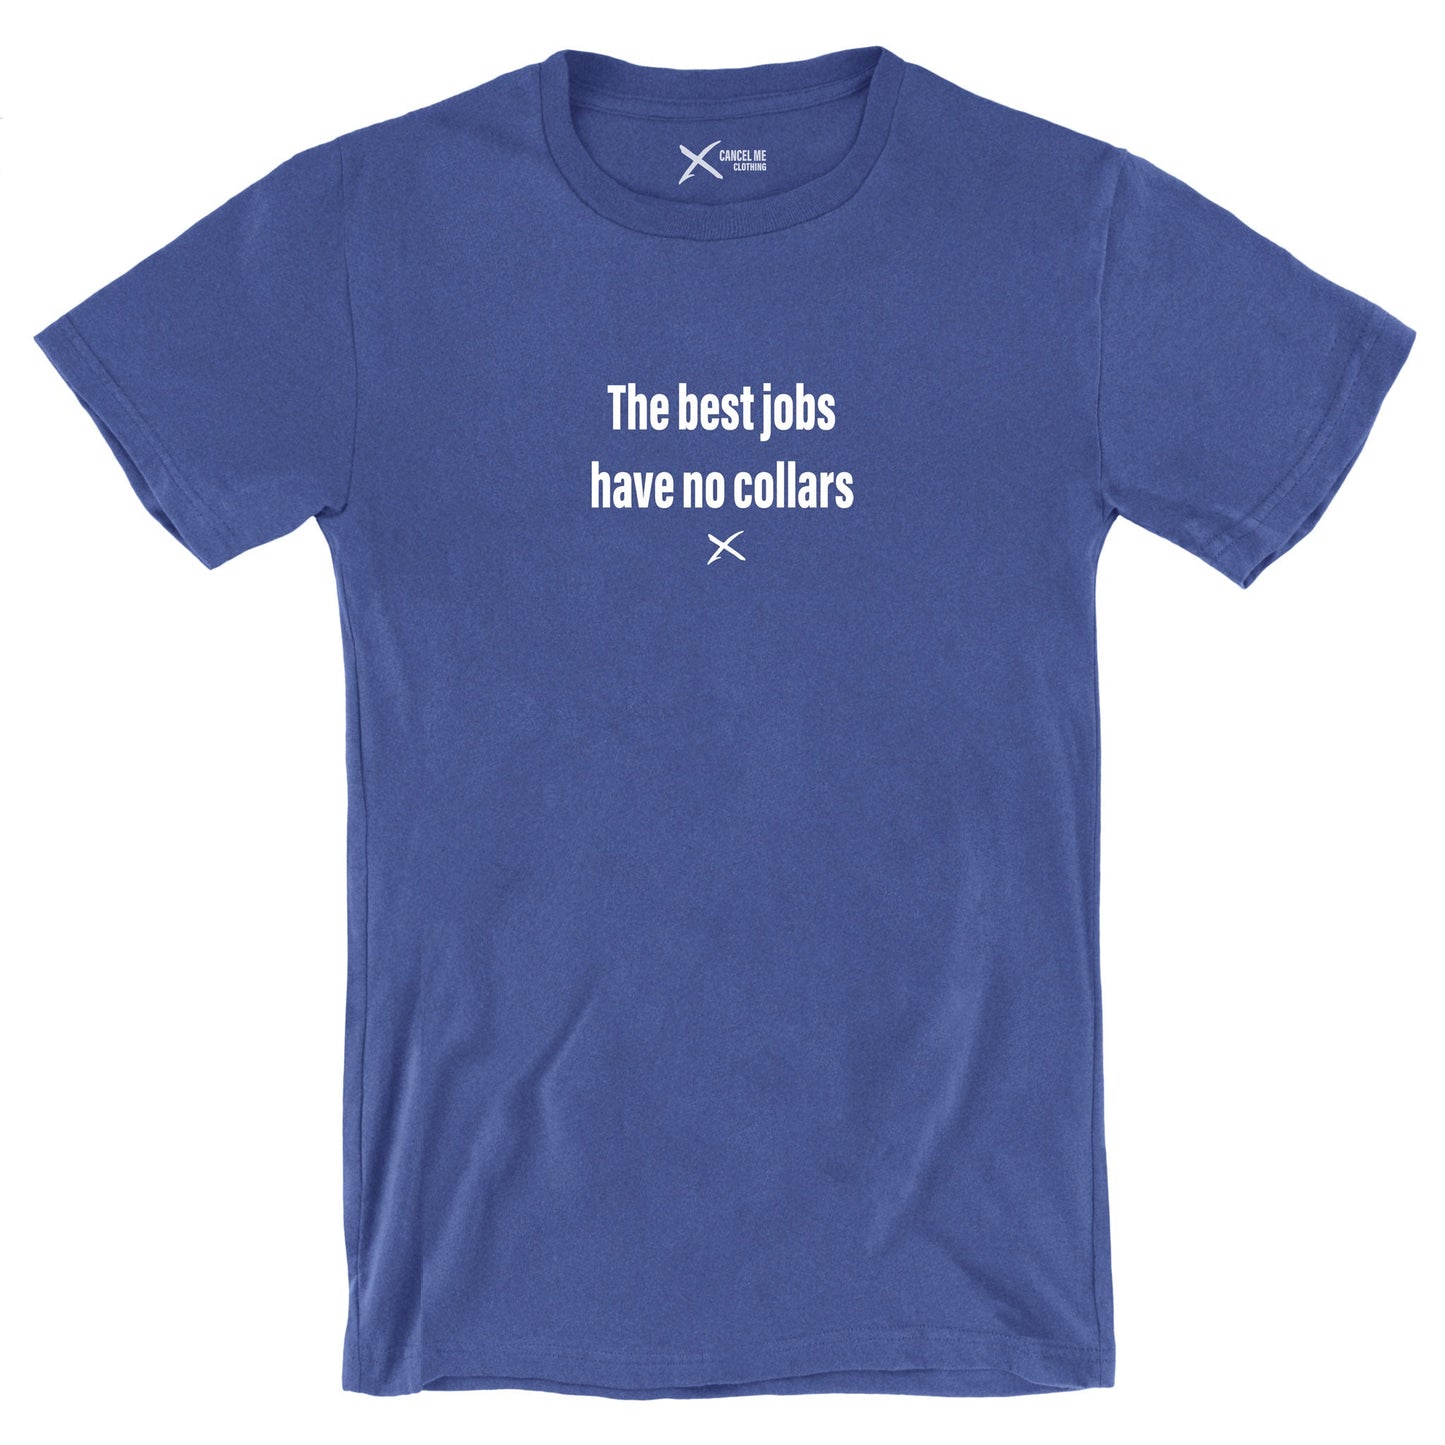 The best jobs have no collars - Shirt